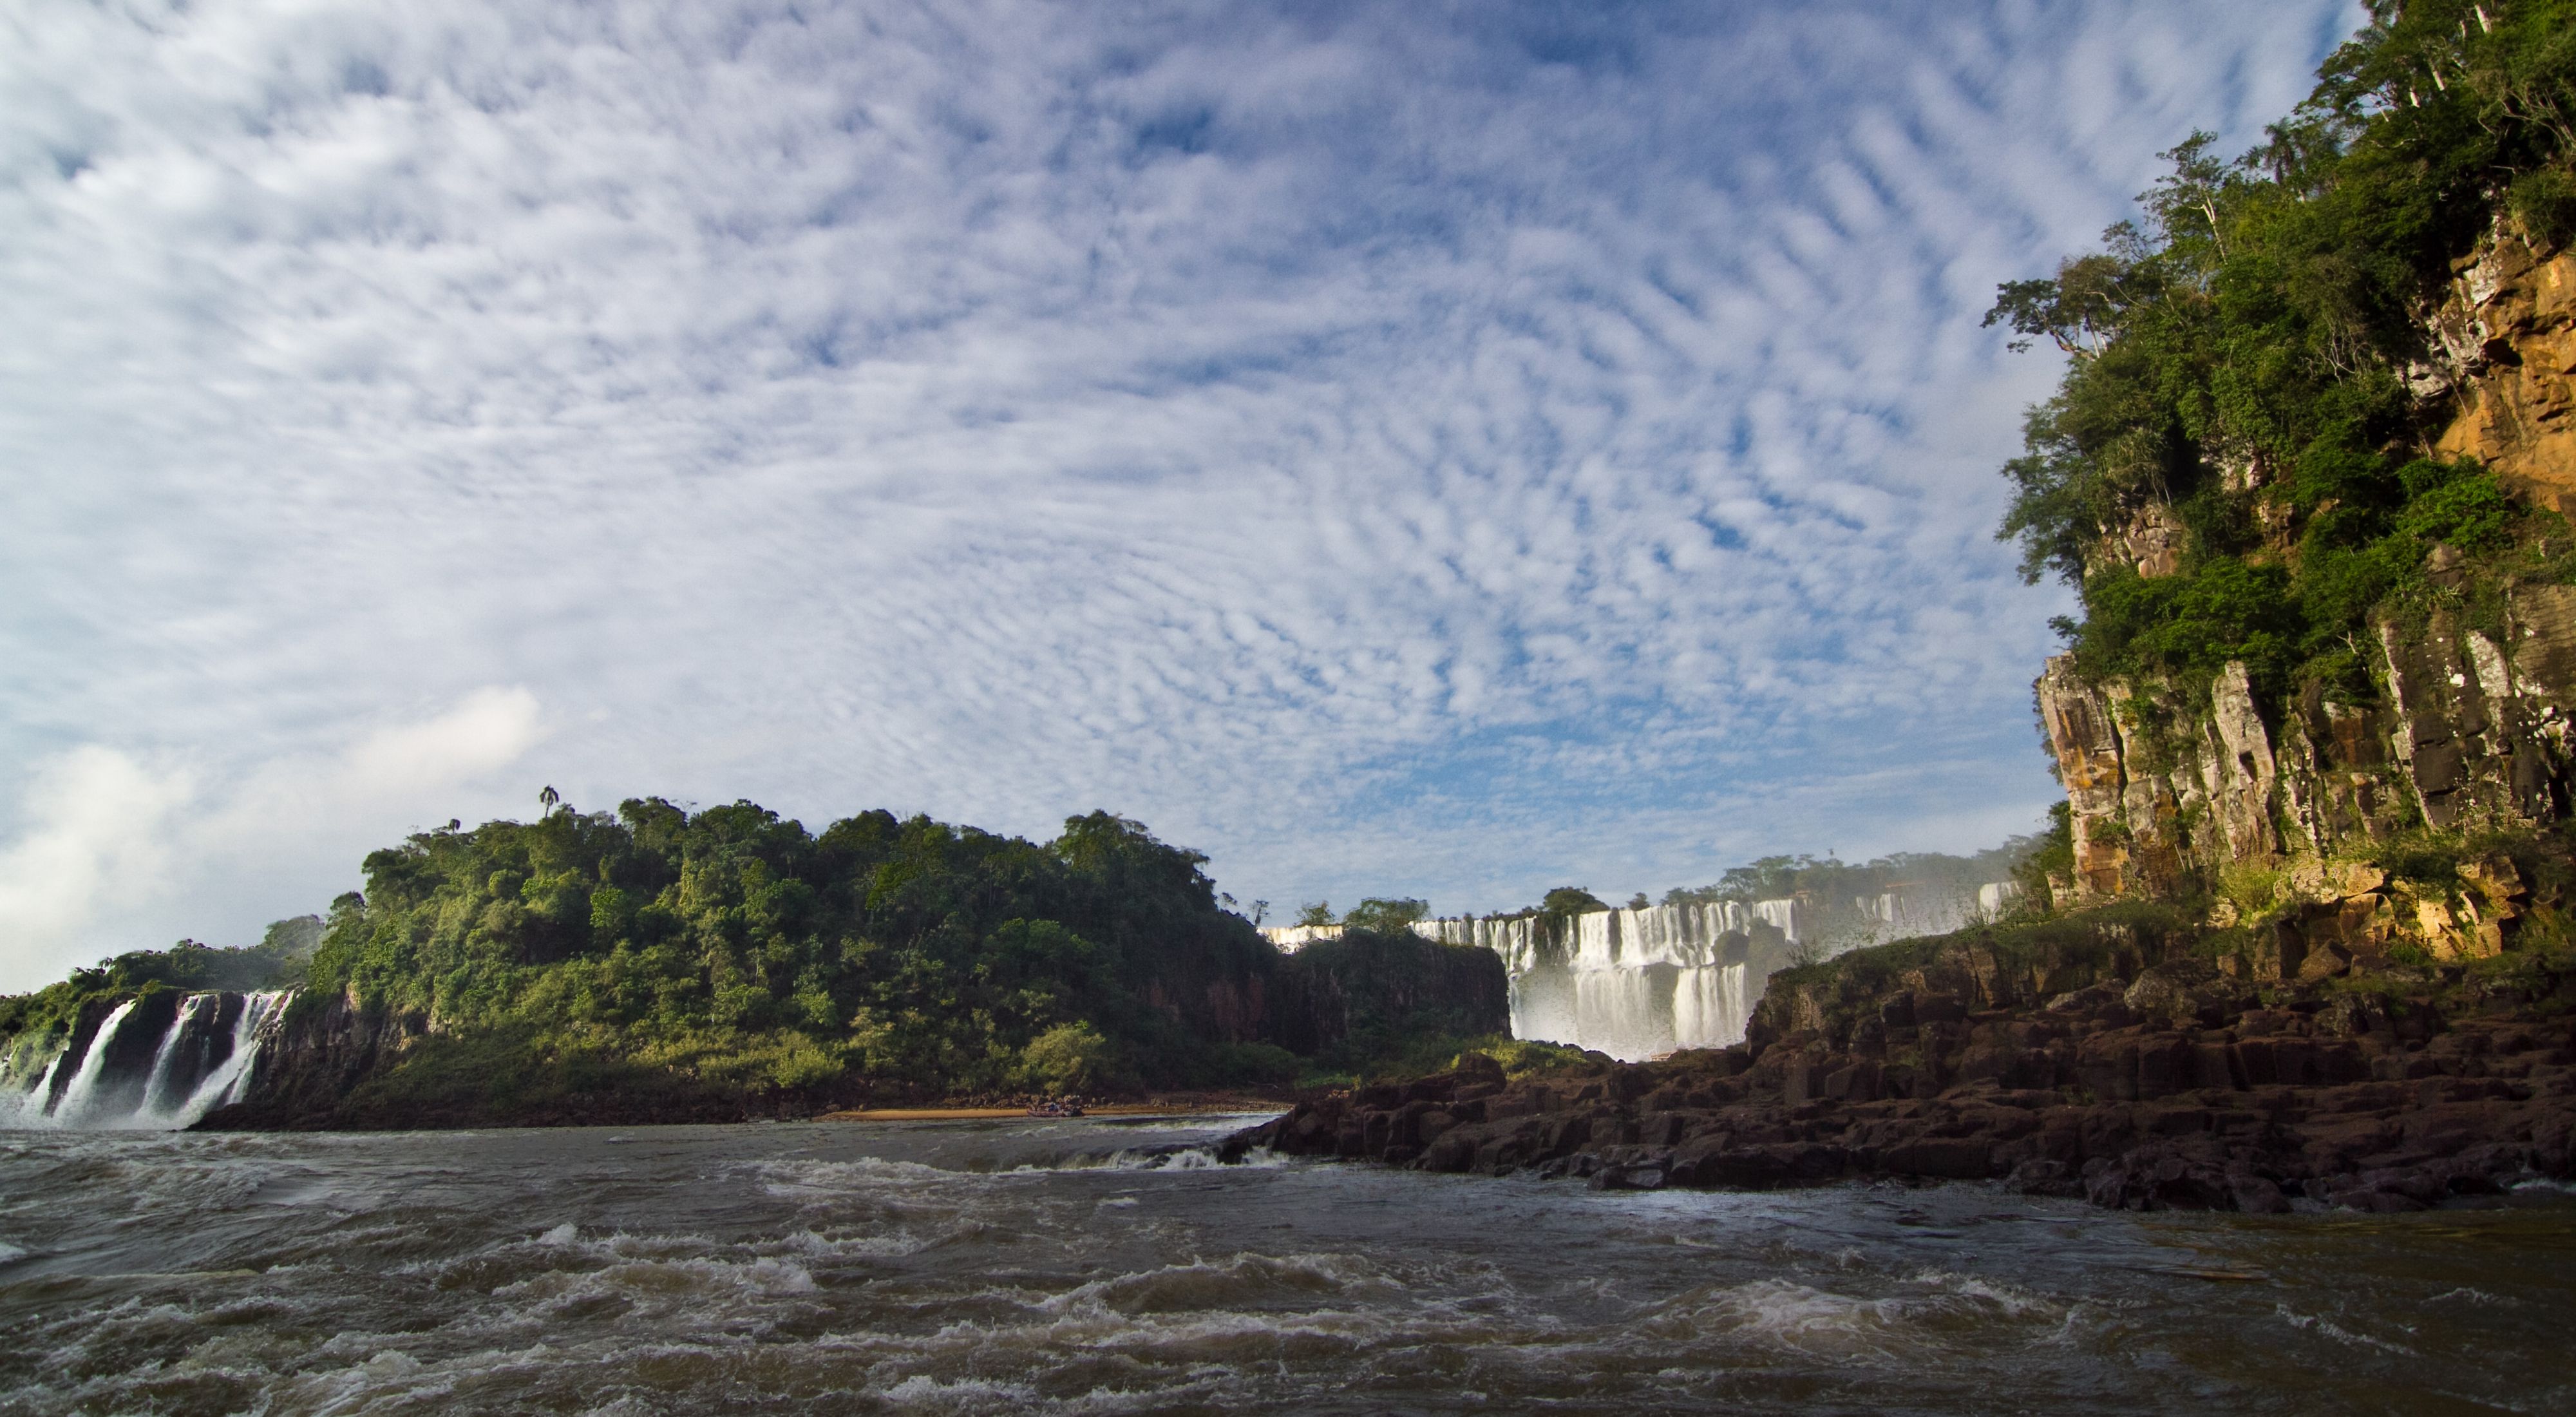 The Nature Conservancy in Brazil